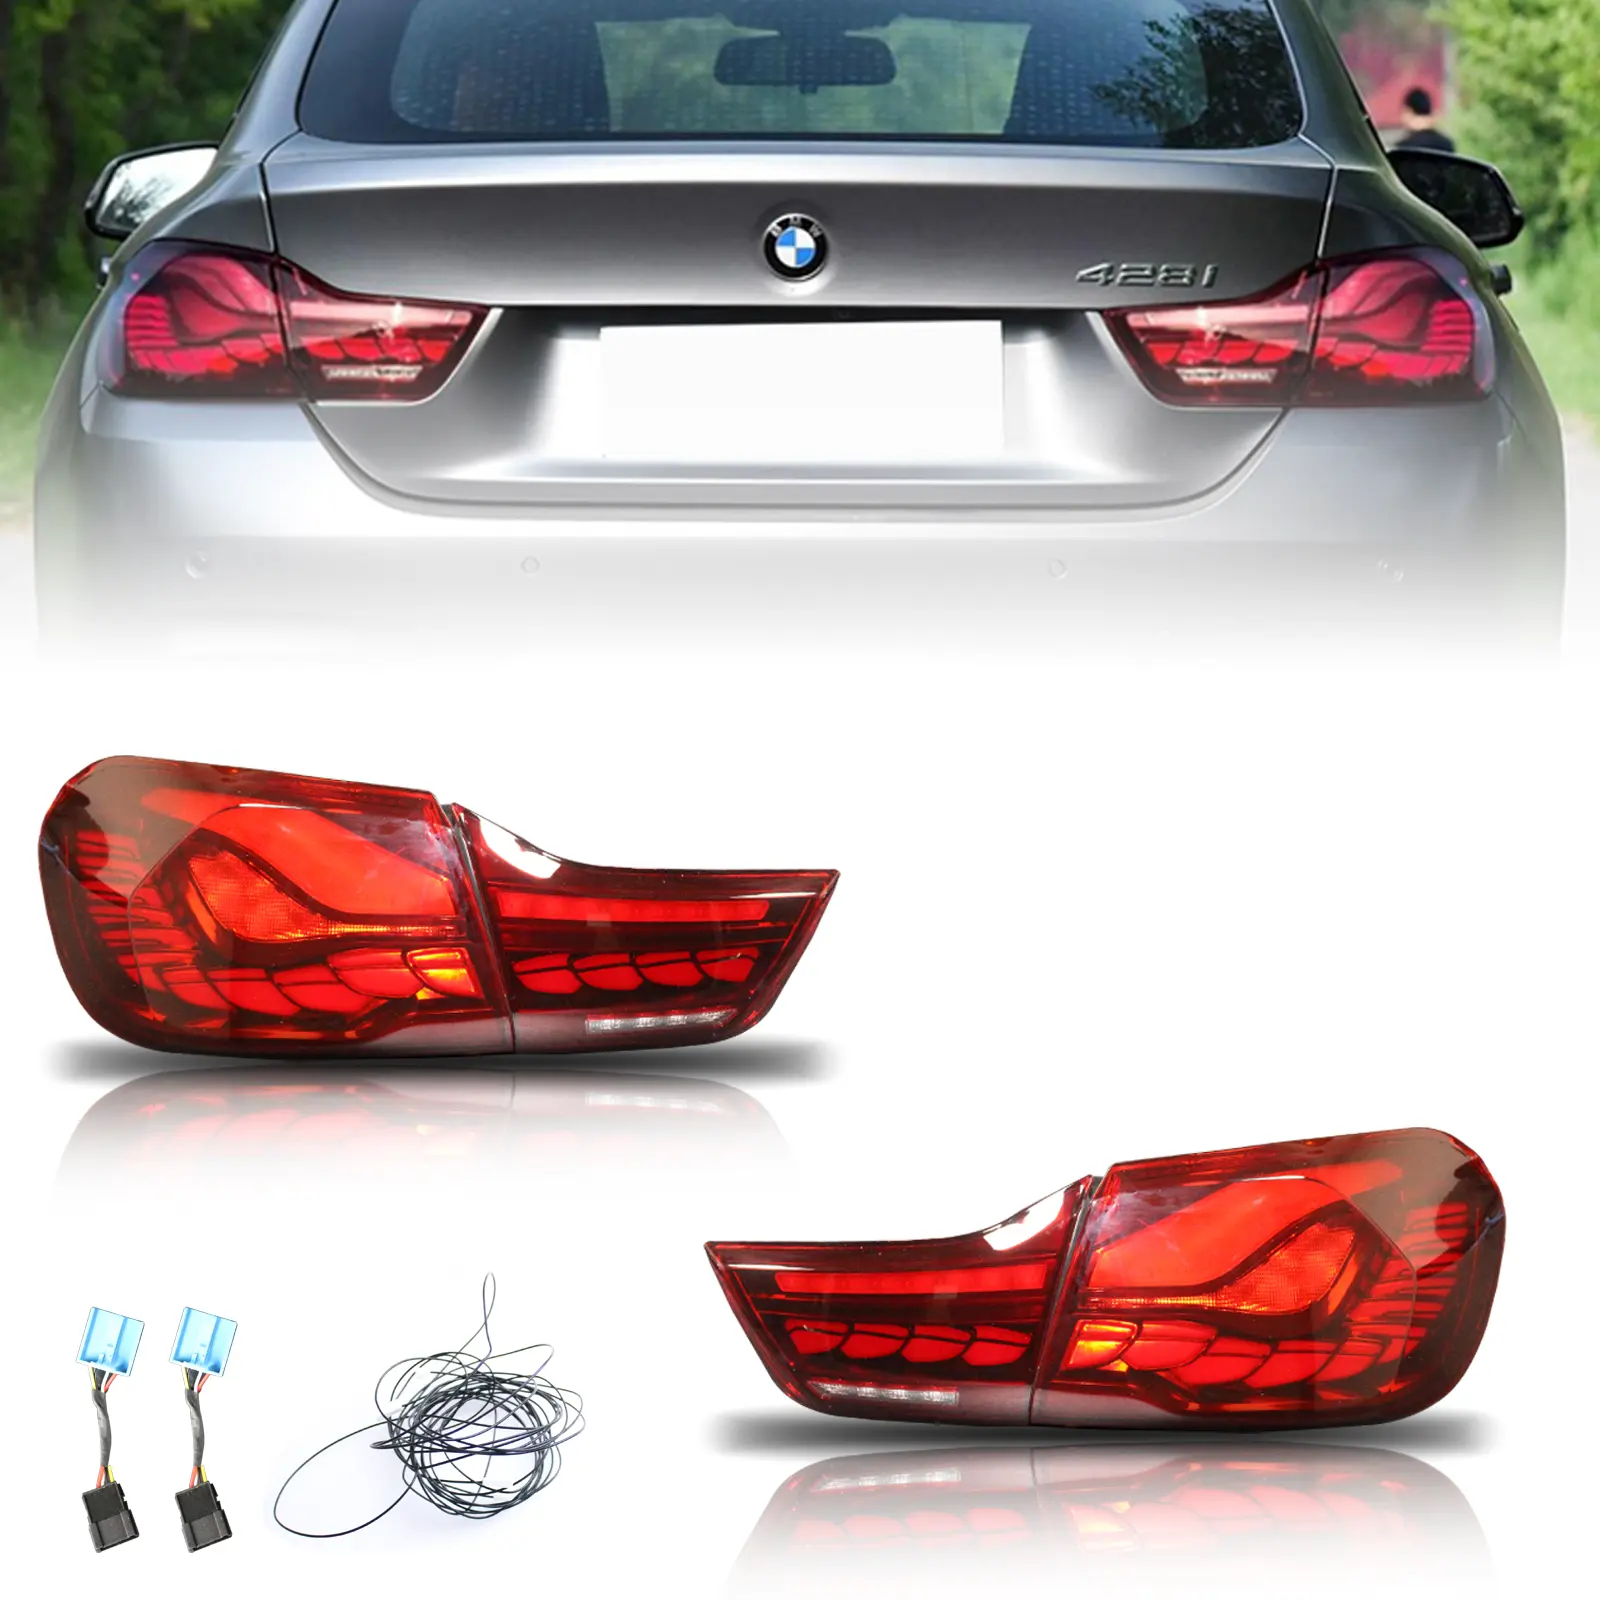 LED GTS Tail Lights For BMW M4 4 Series F32 F82 2014-2020 Start Up Animation